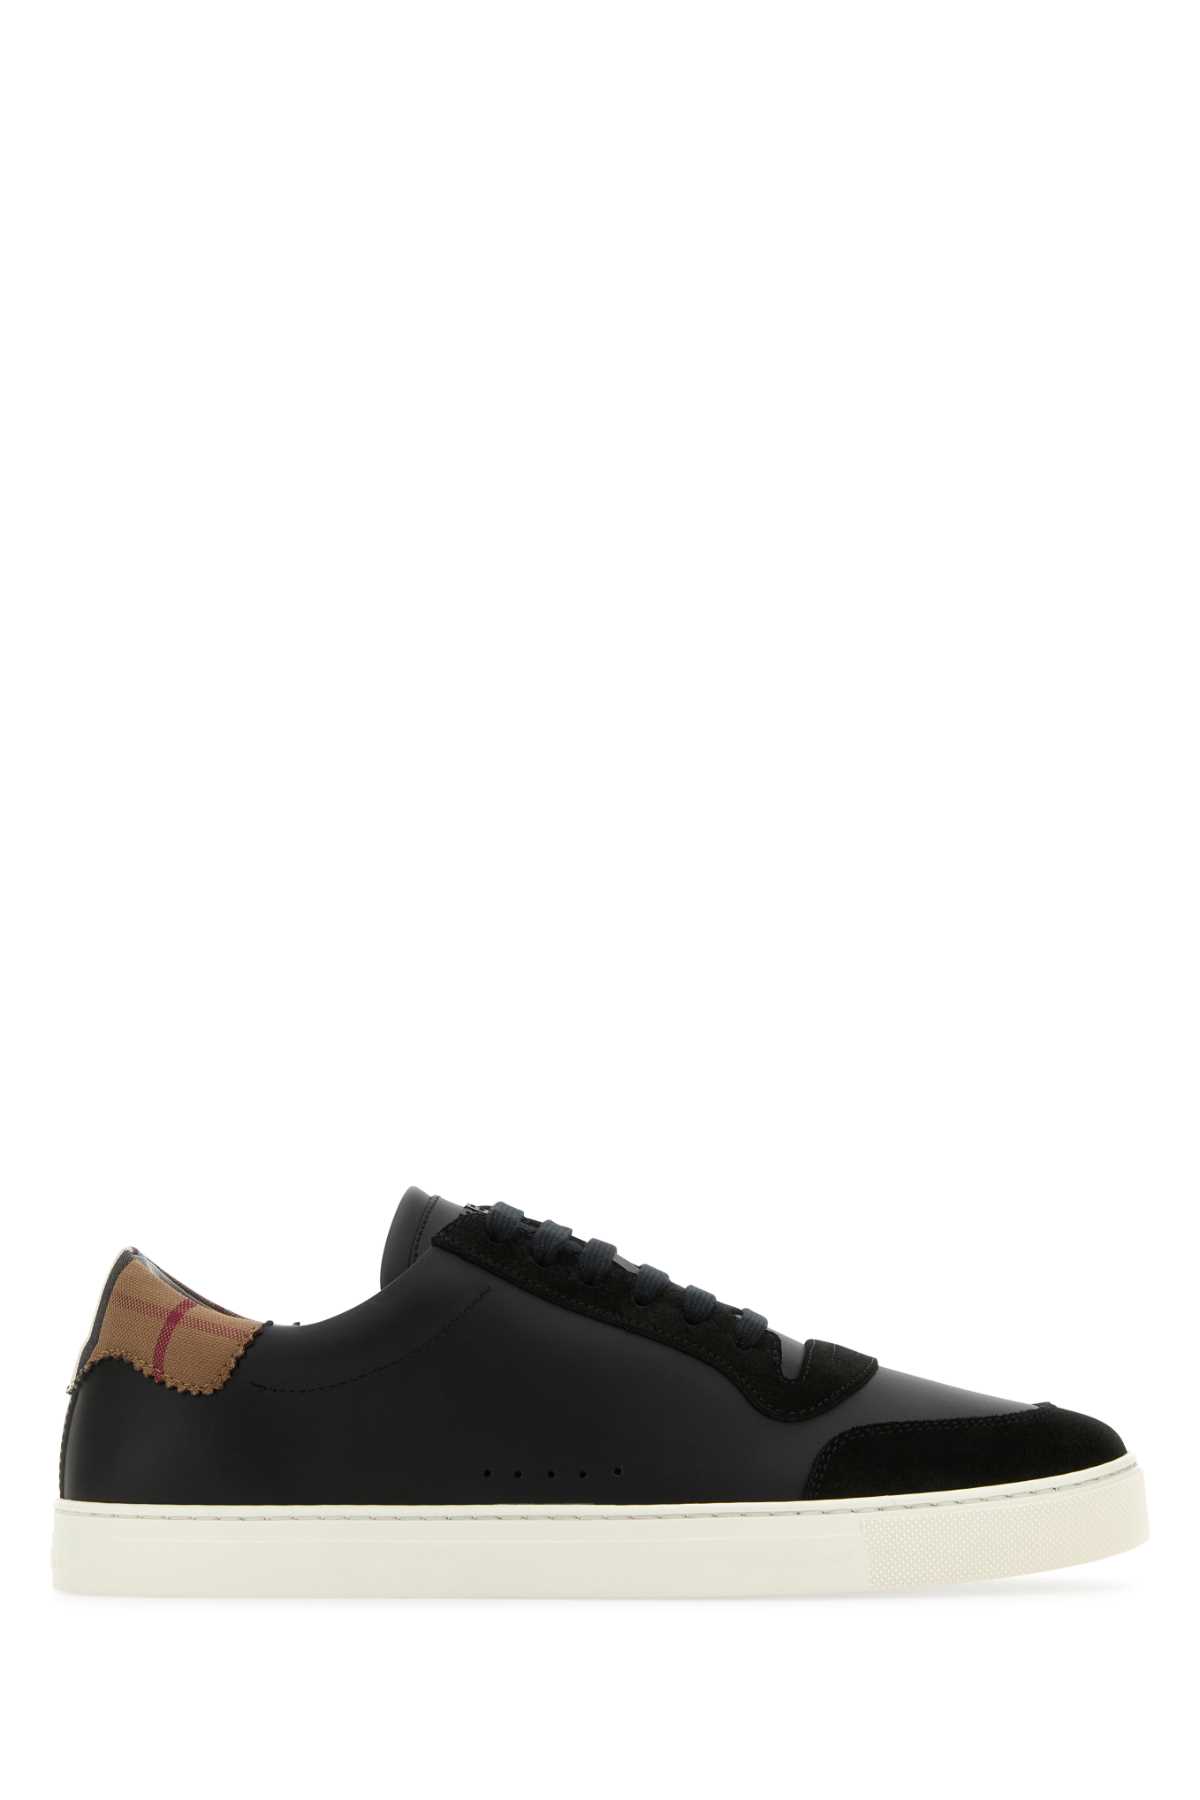 Shop Burberry Black Leather Sneakers